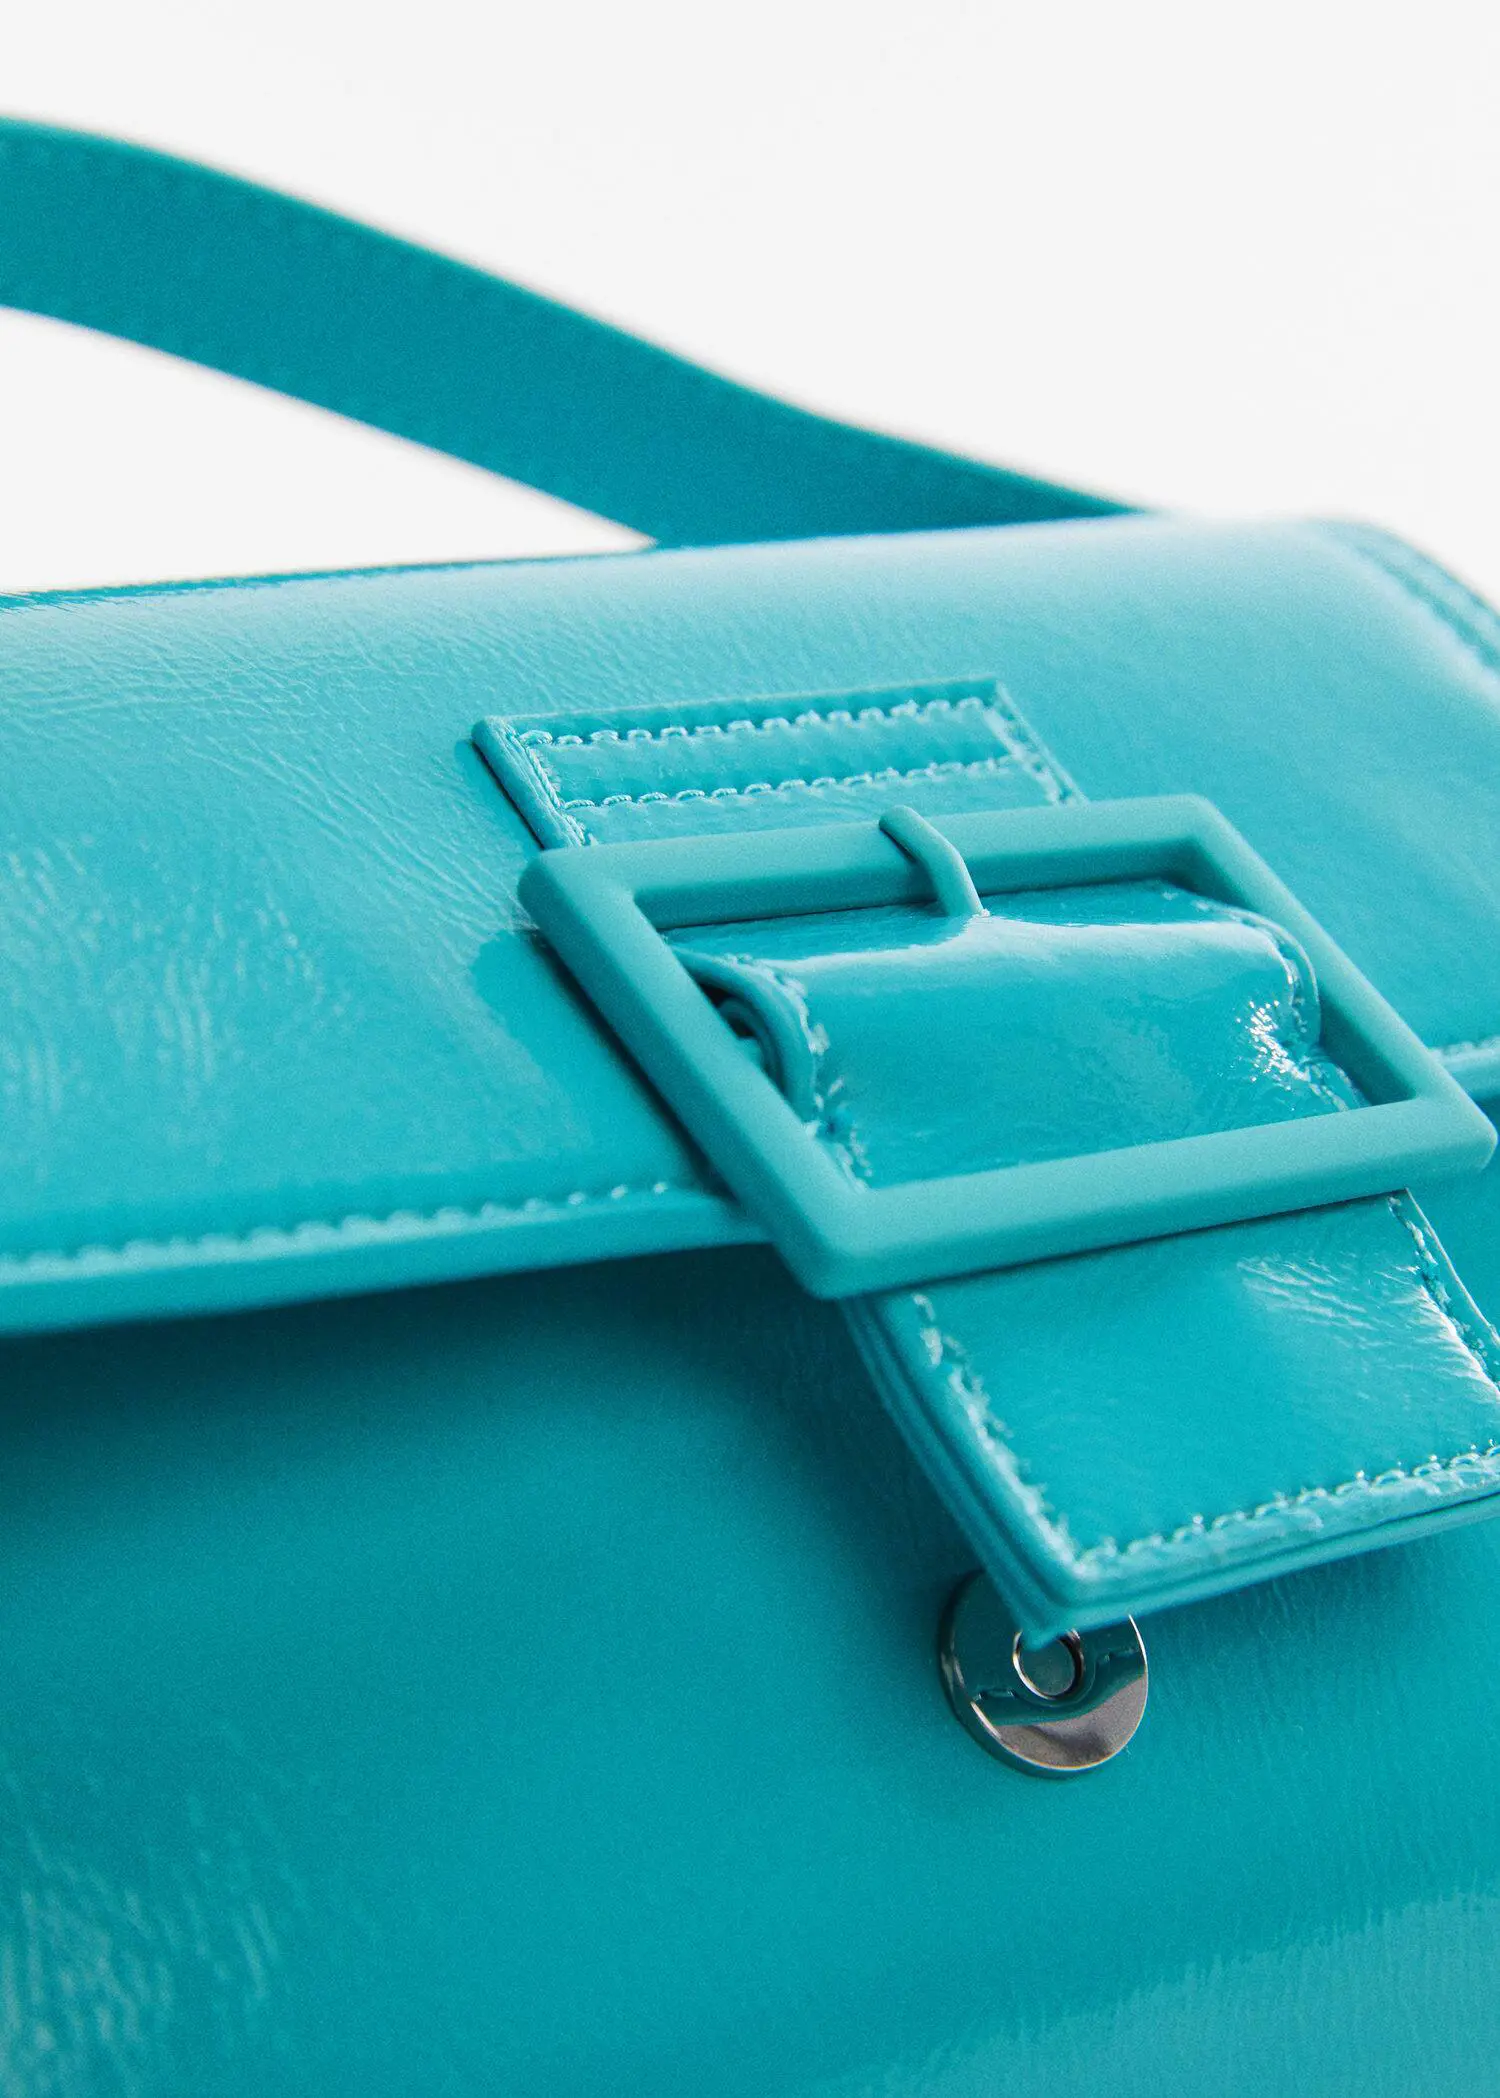 Mango Buckled flap bag. a close-up view of a turquoise purse. 